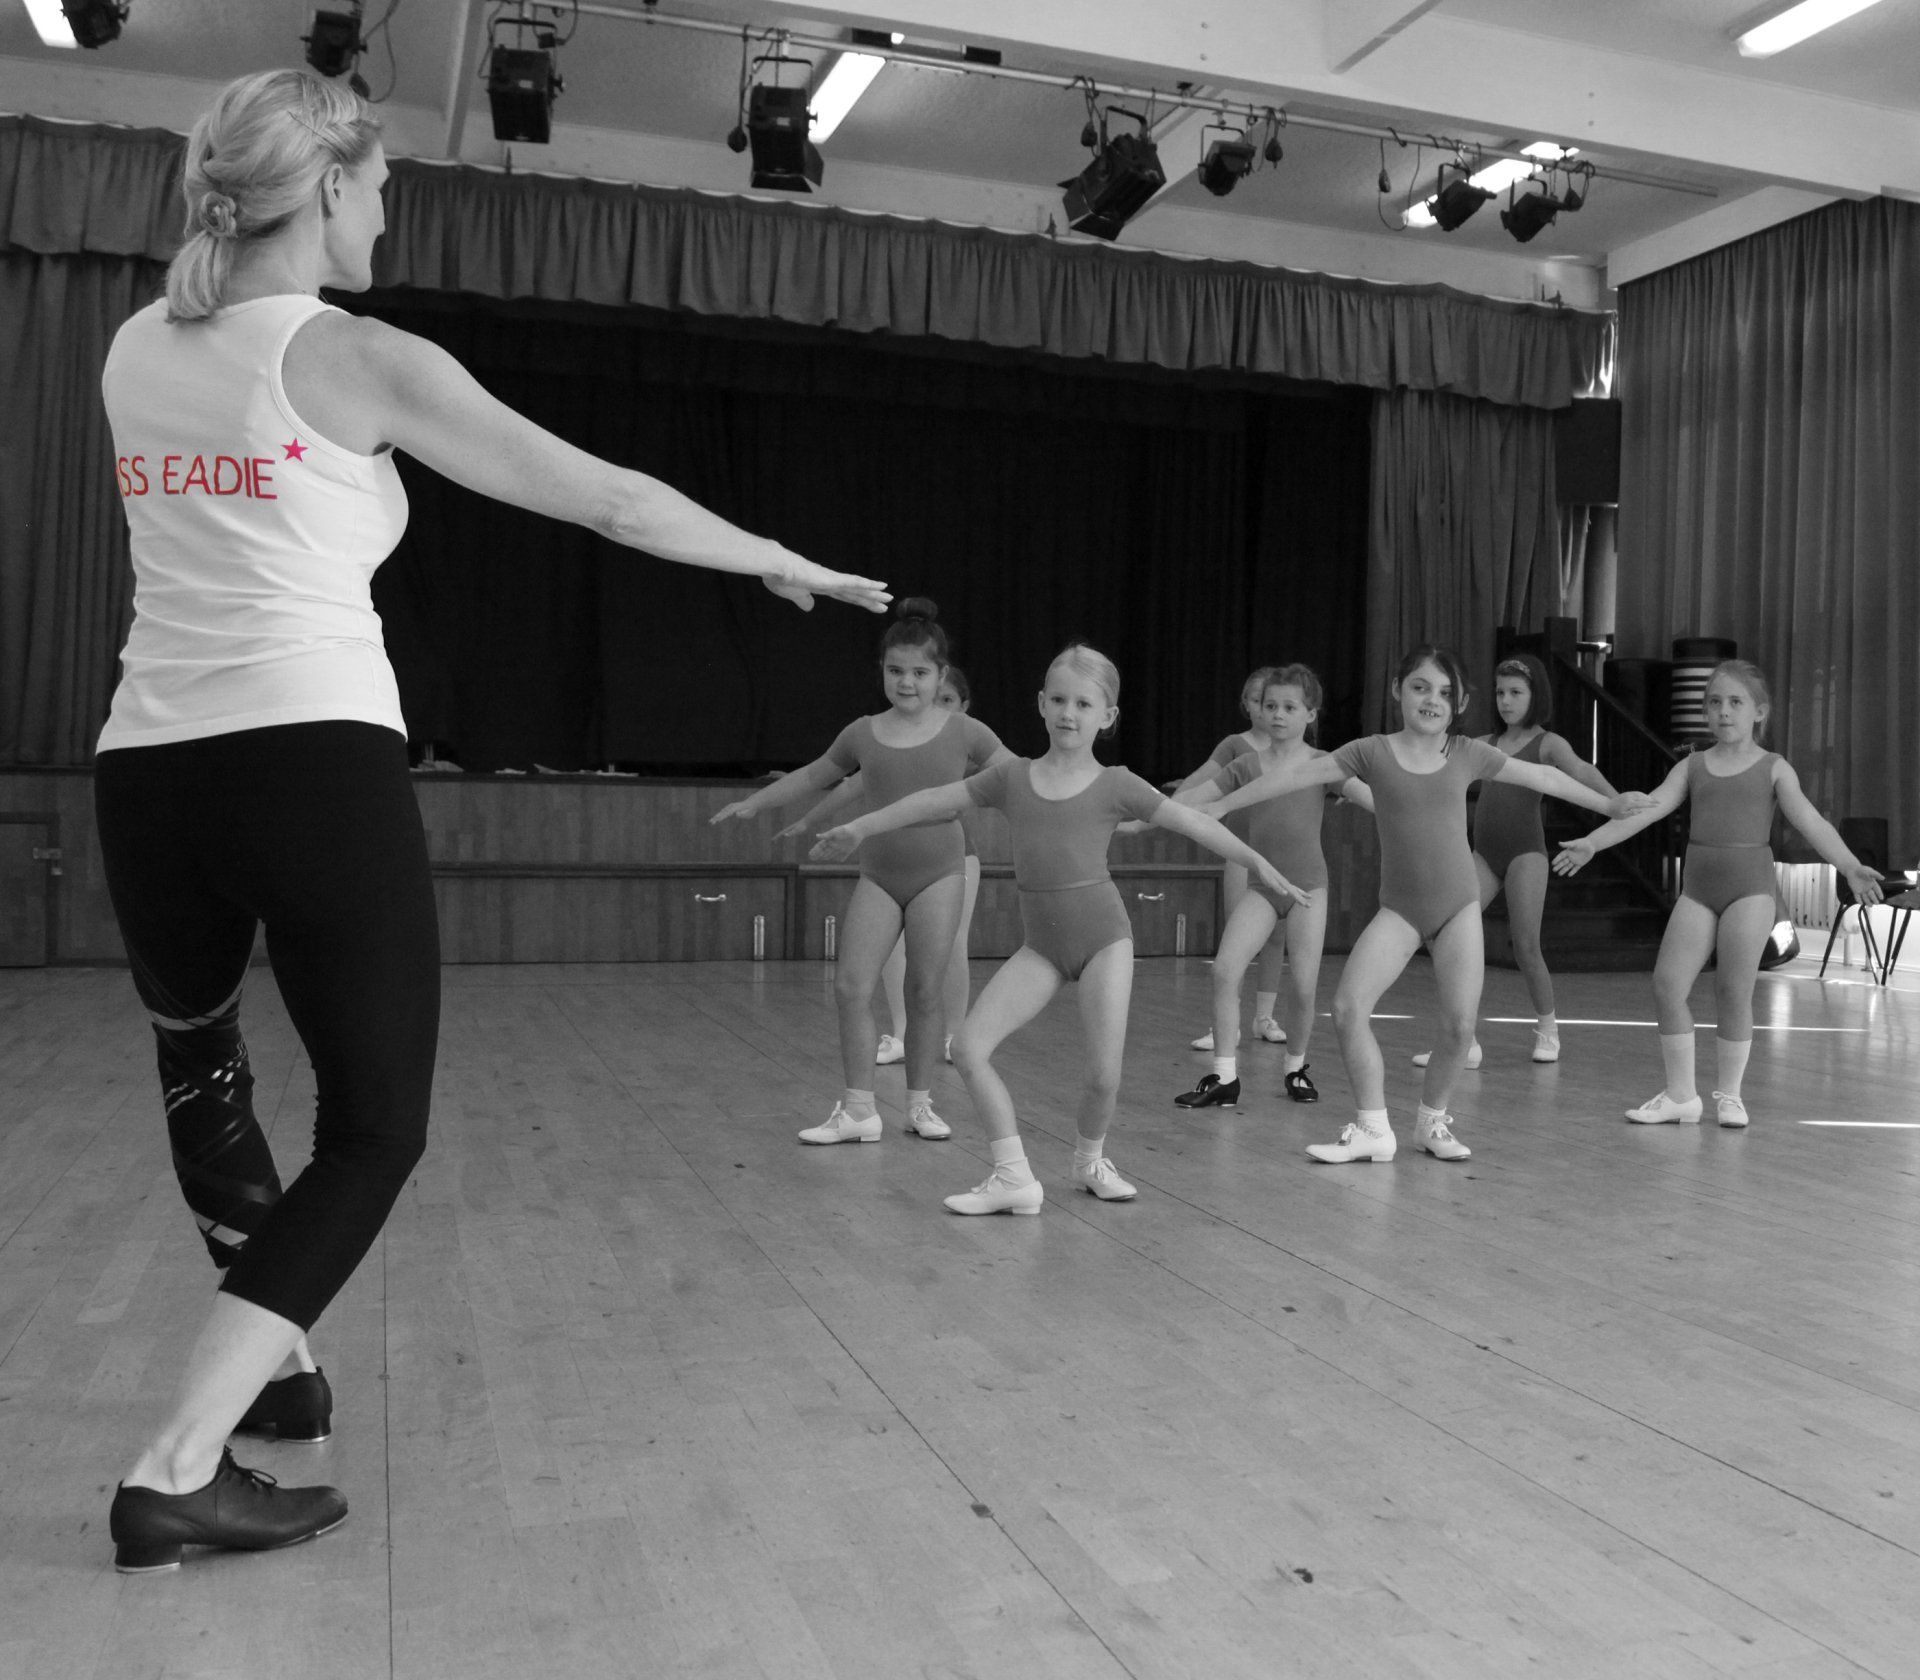 Dance examinations and show opportunities